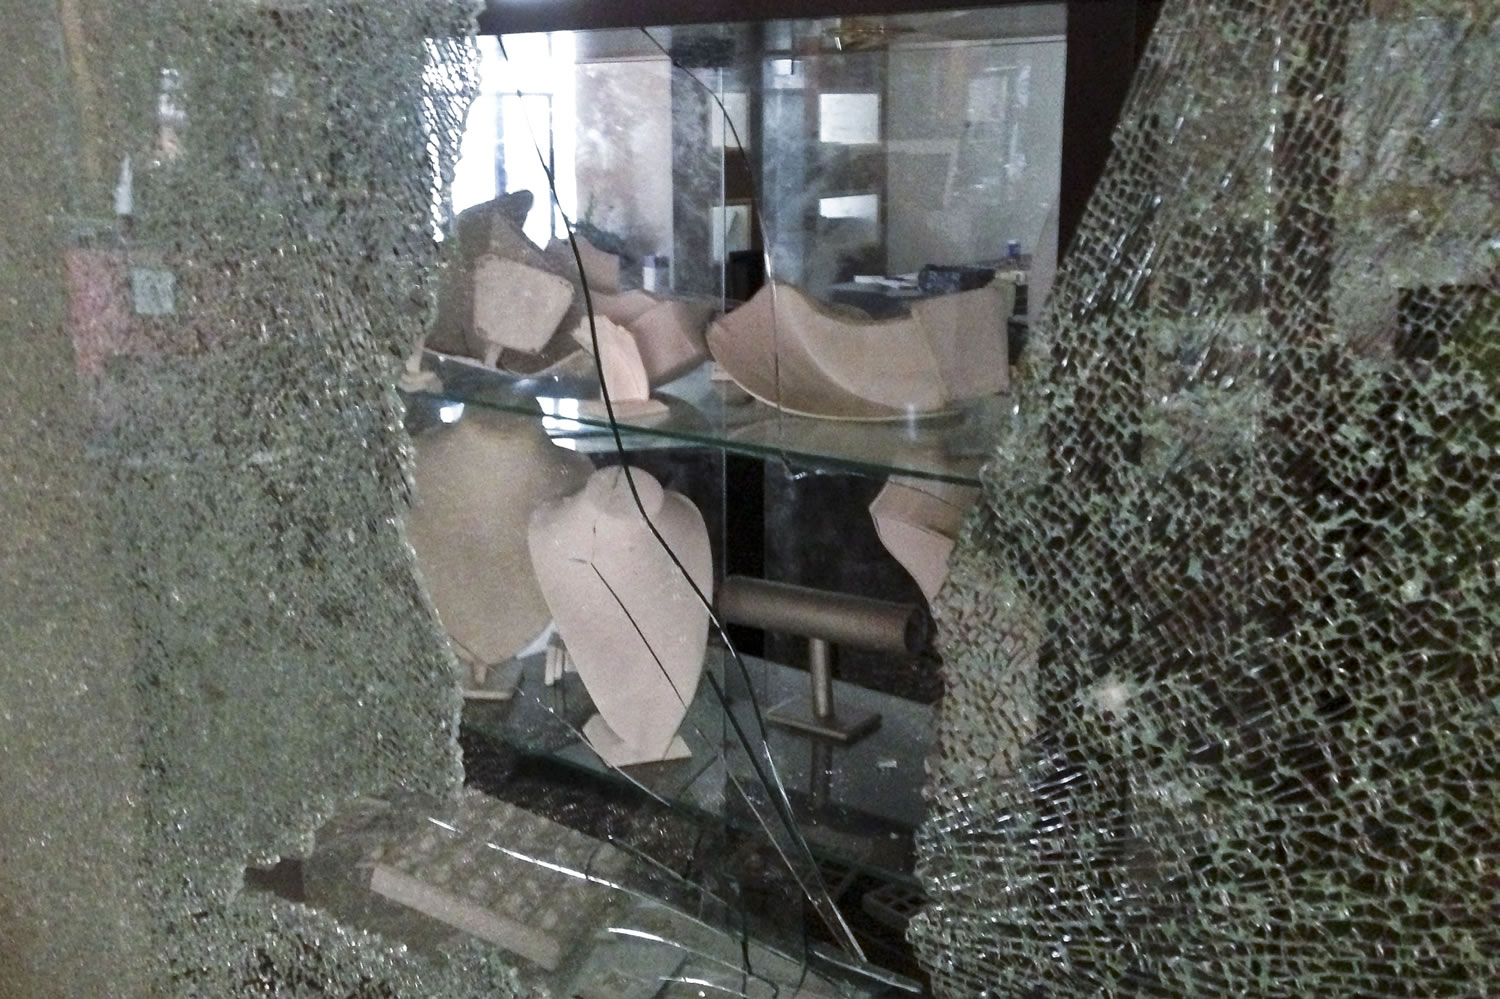 Empty displays are visible behind the shattered window of a jewelry store Tuesday at the Westgate Mall in Nairobi, Kenya.